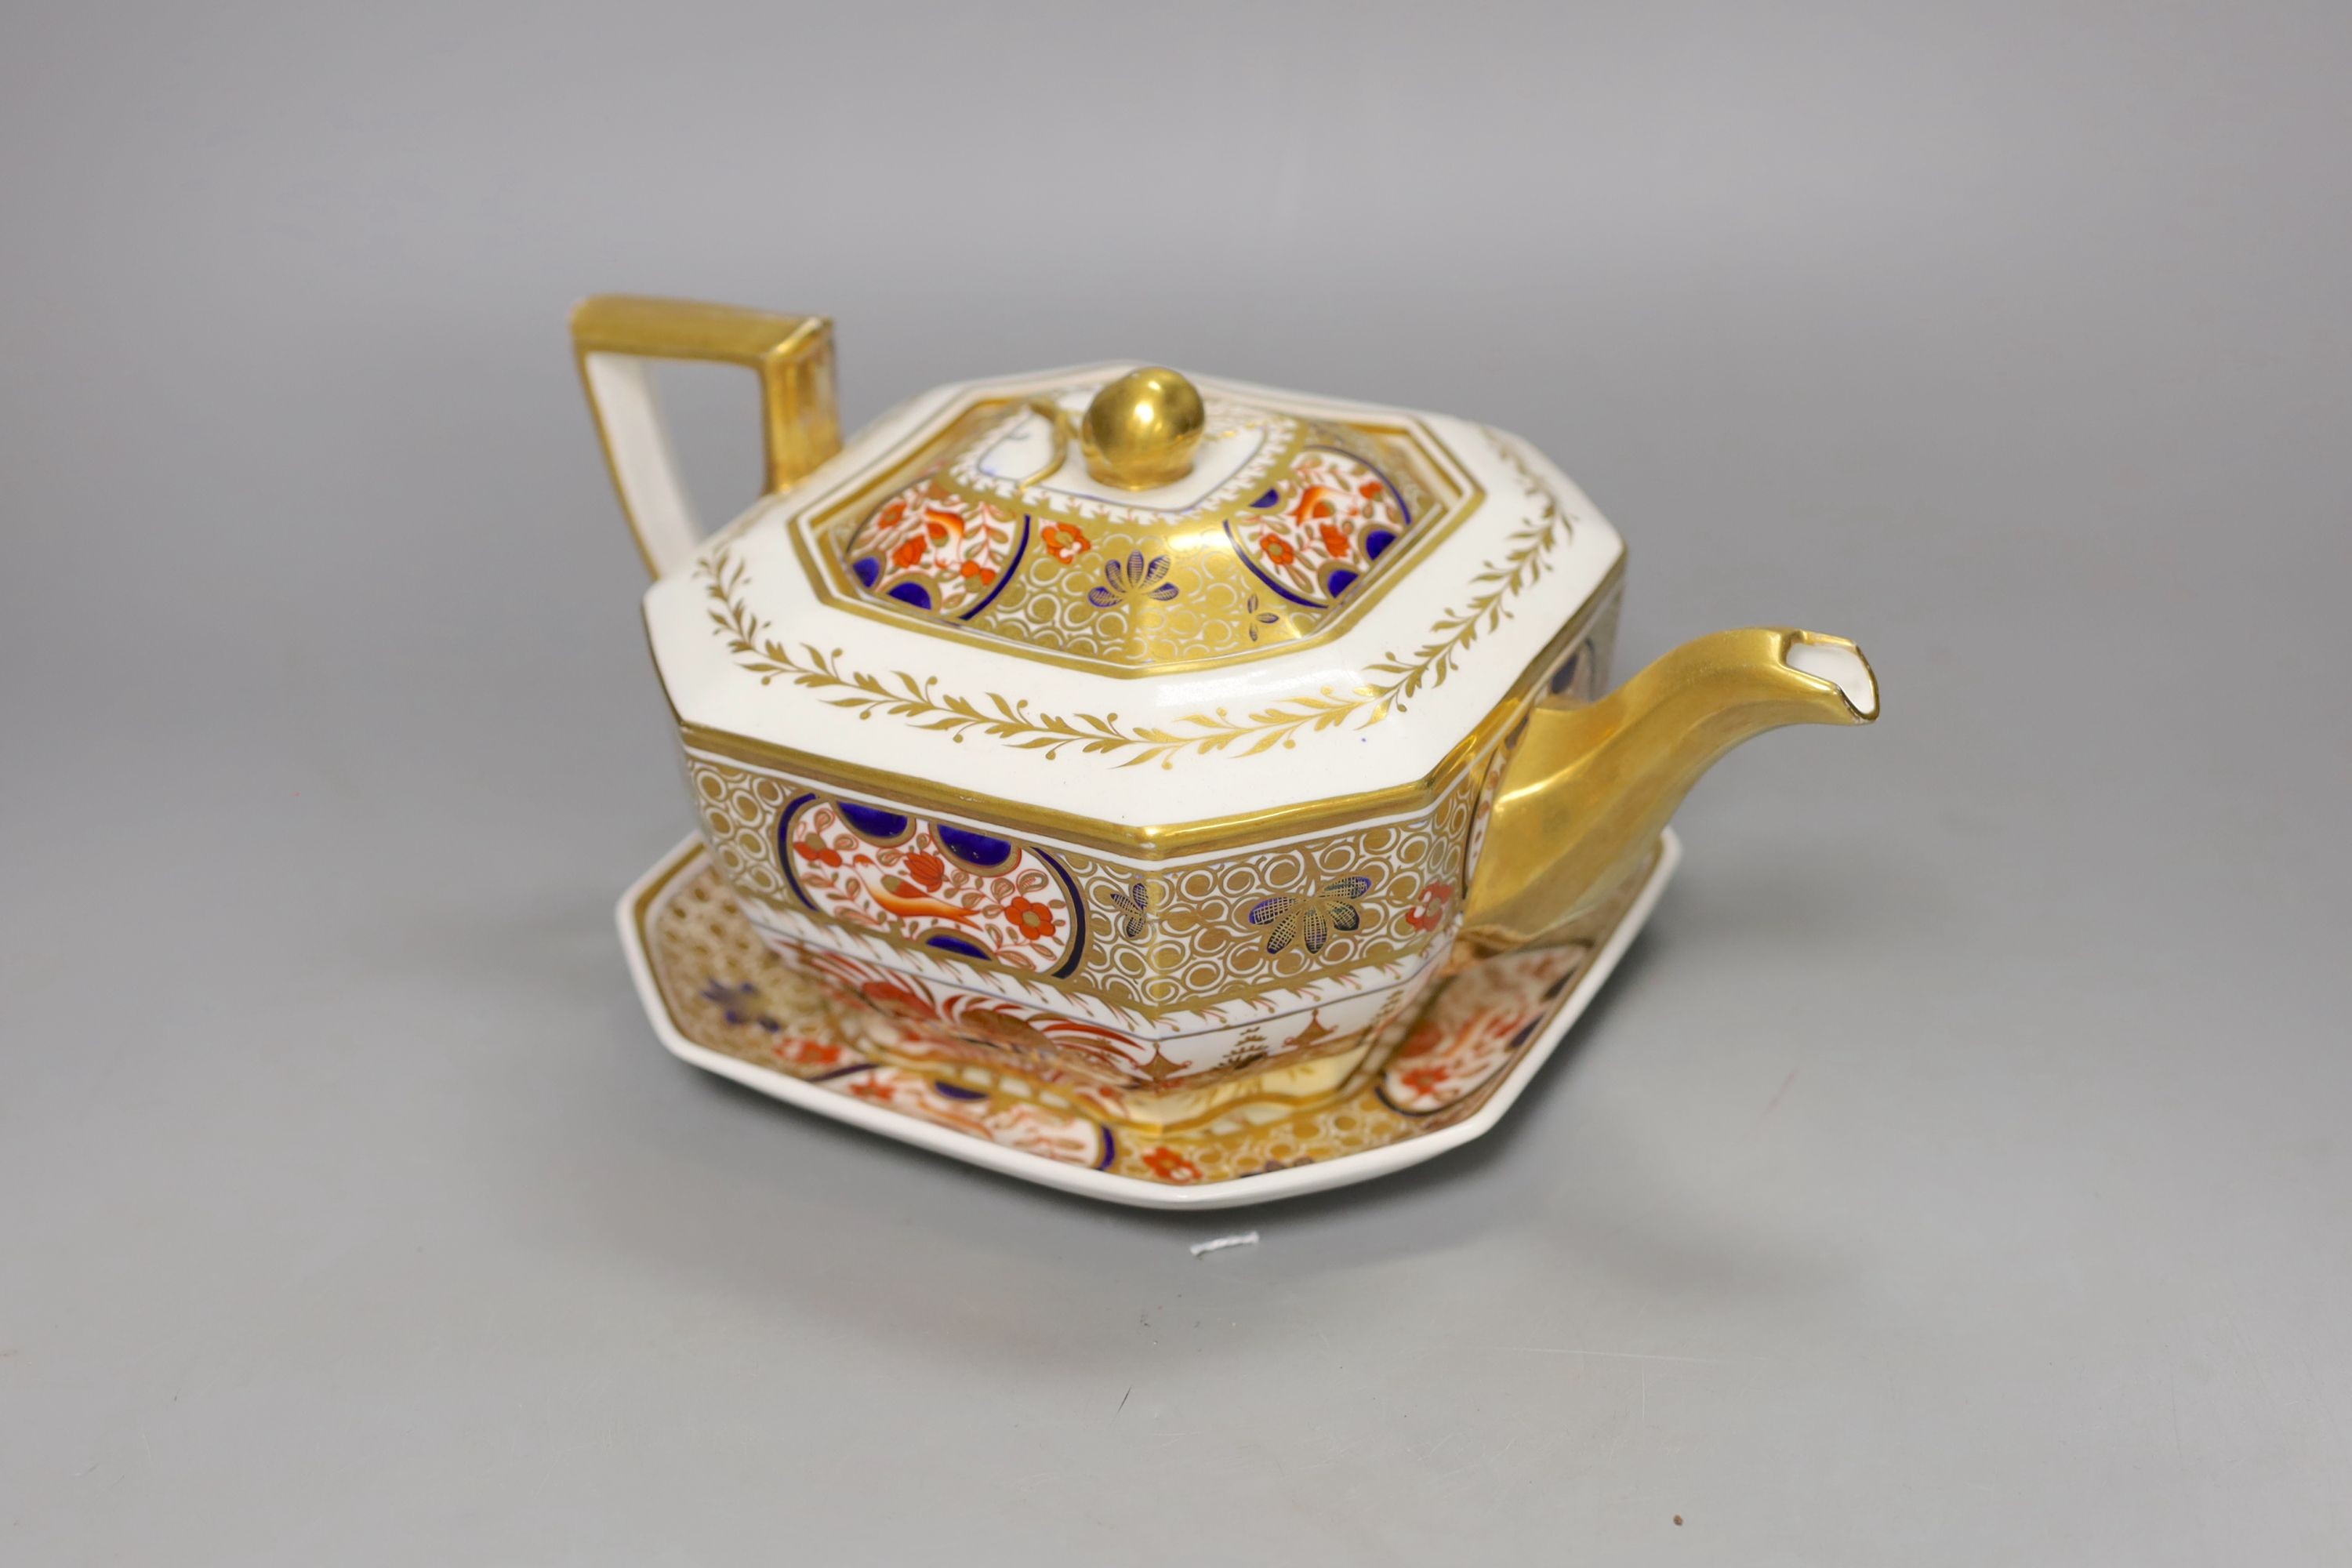 A Spode teapot cover and stand painted with Imari pattern, 1495, c.1820, 24.5 cm long